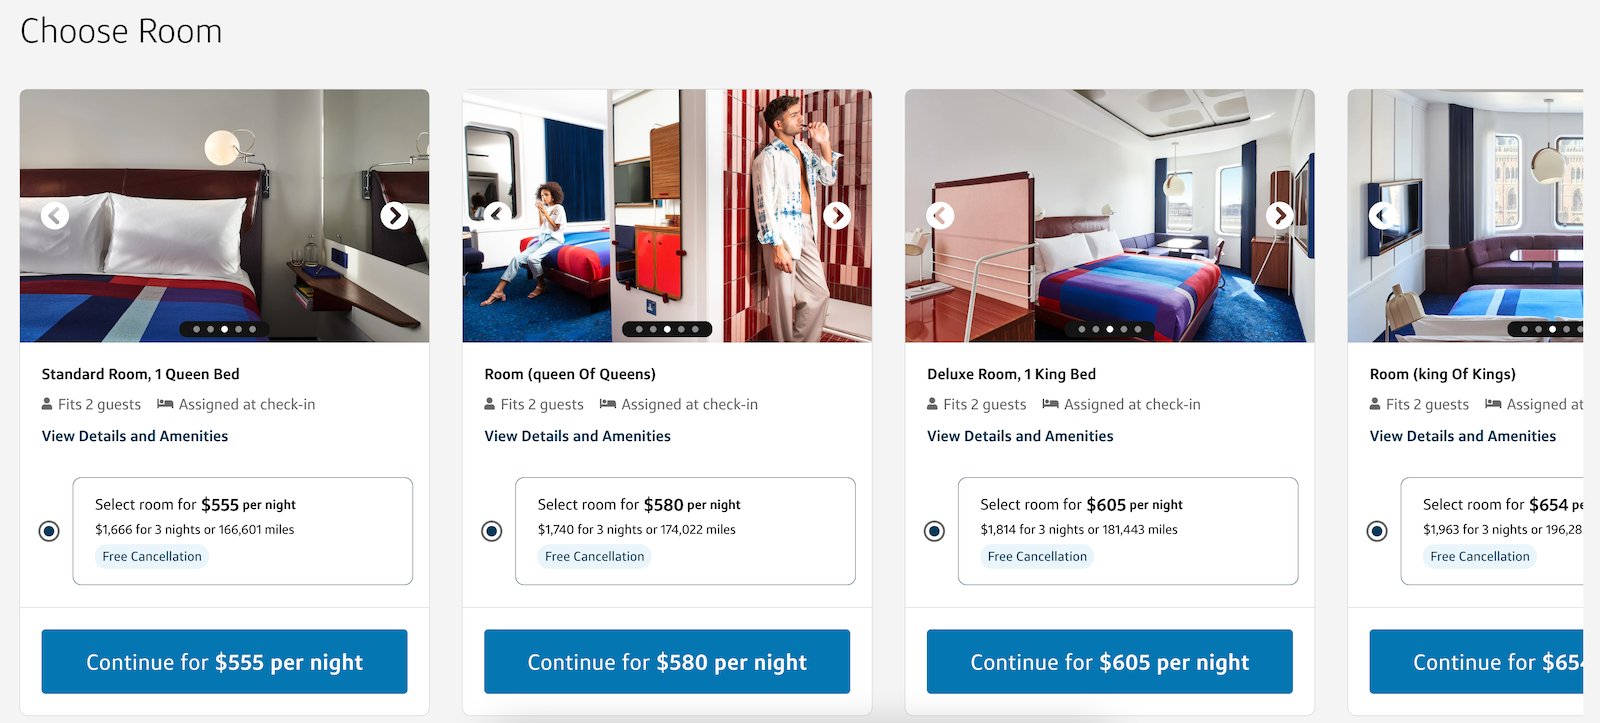 hotel room type options and pricing